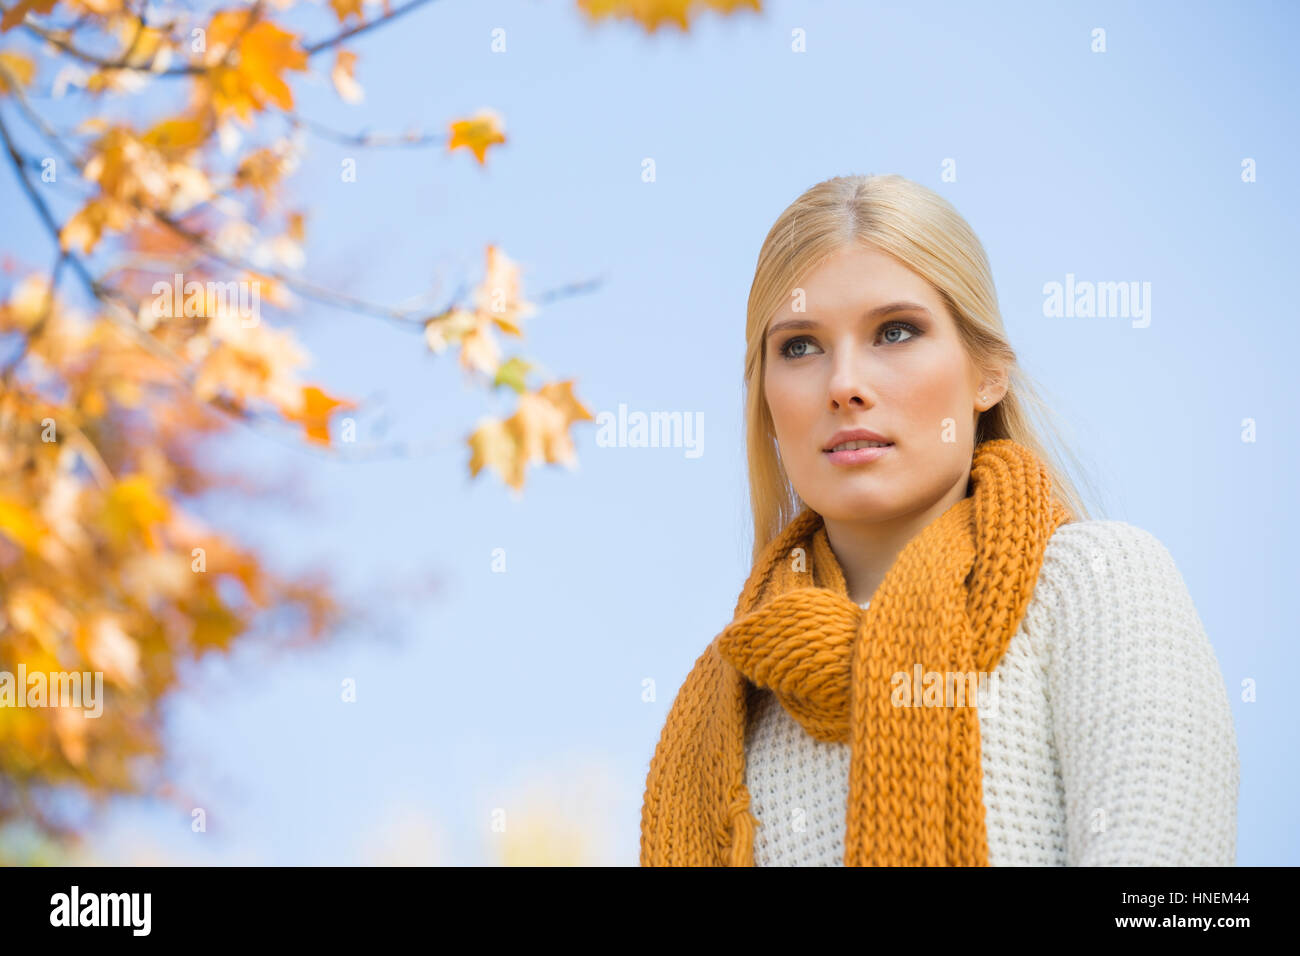 Low angle view of thoughtful young woman against sky Stock Photo